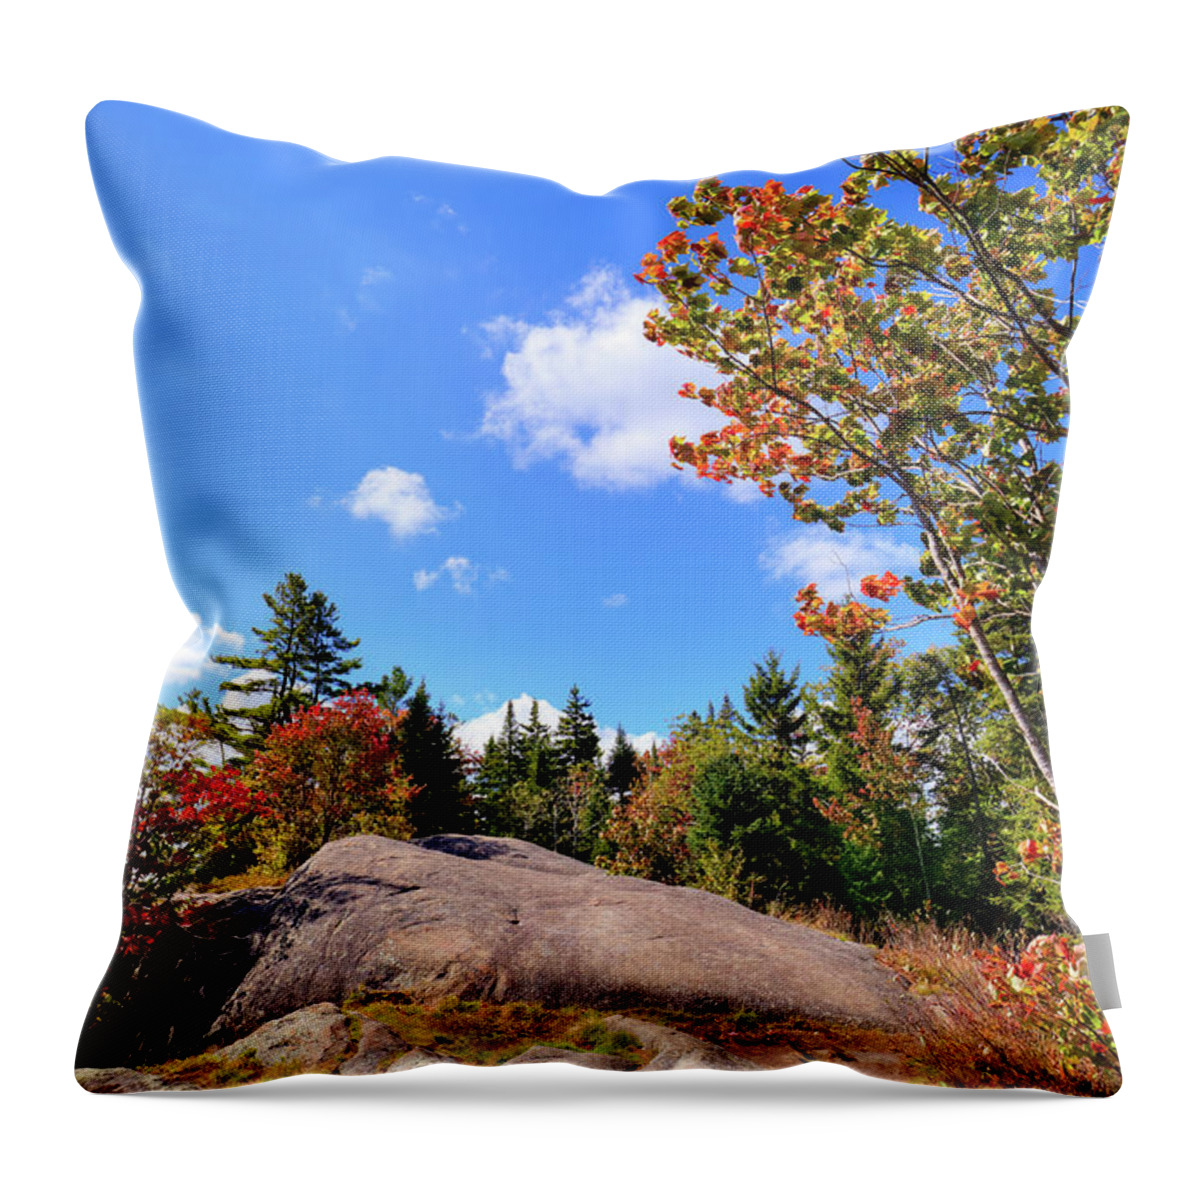 Landscapes Throw Pillow featuring the photograph The Maples on Bald Mountain by David Patterson